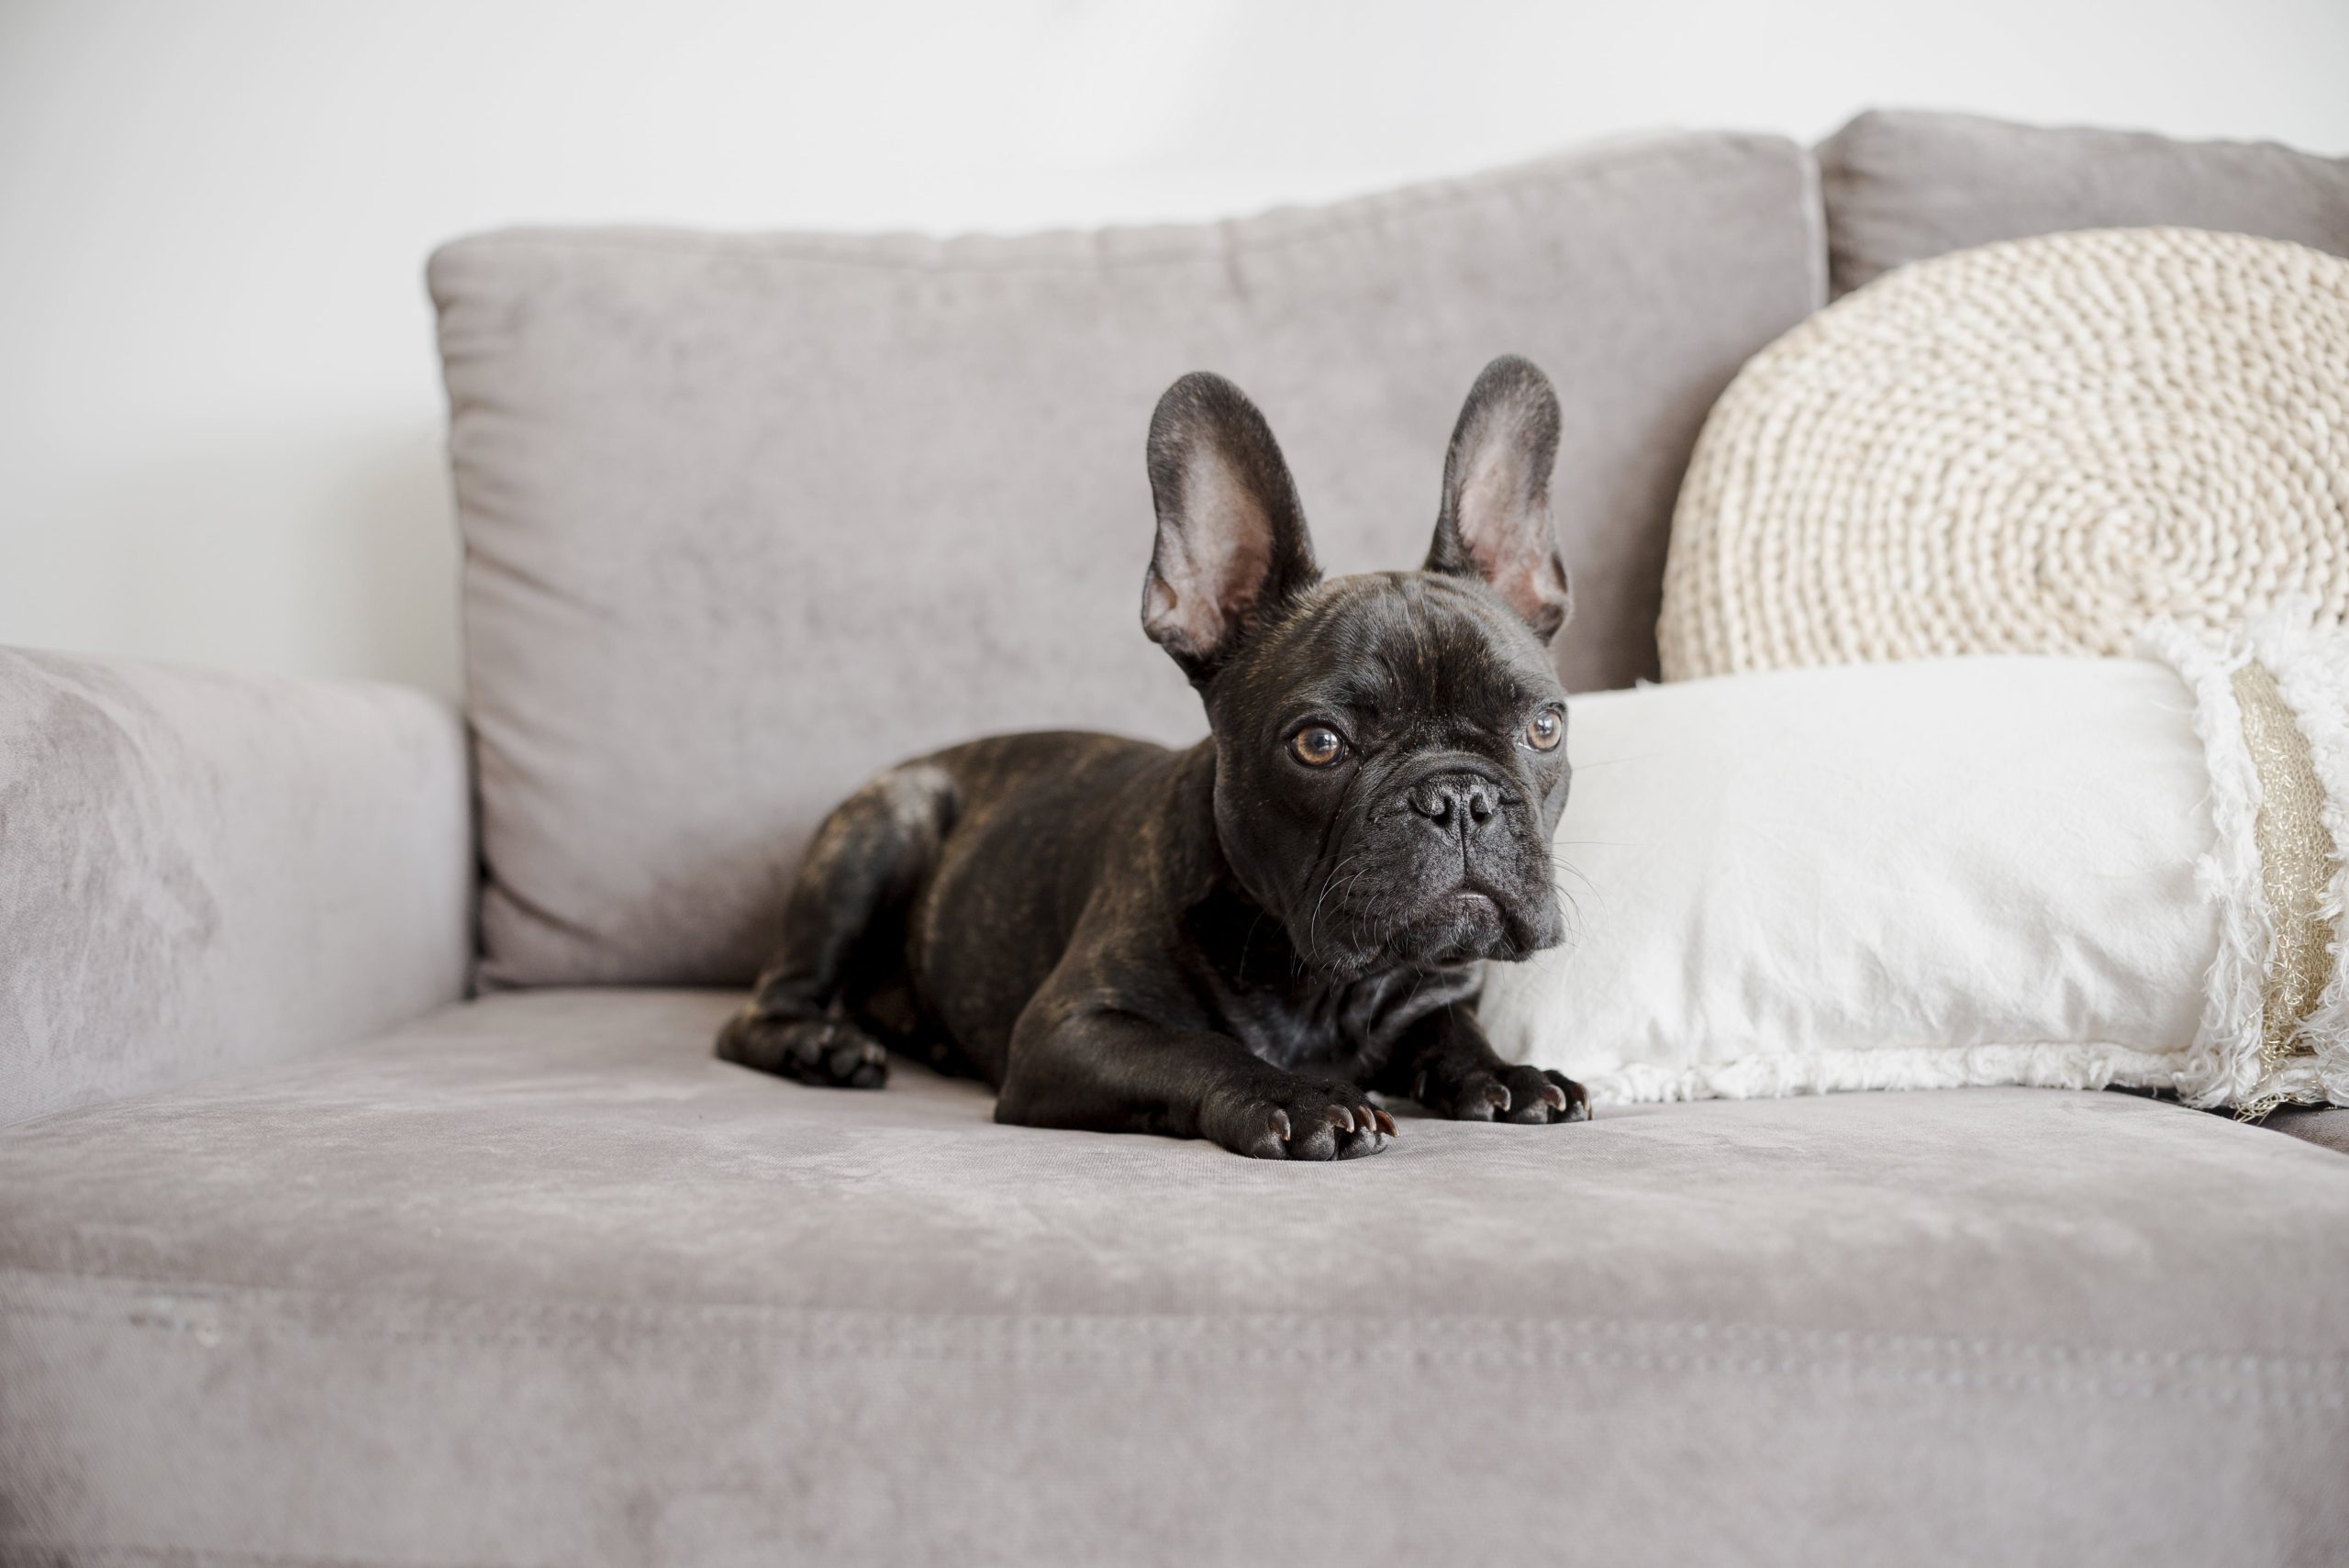  How to get rid of dog gland smell on furniture